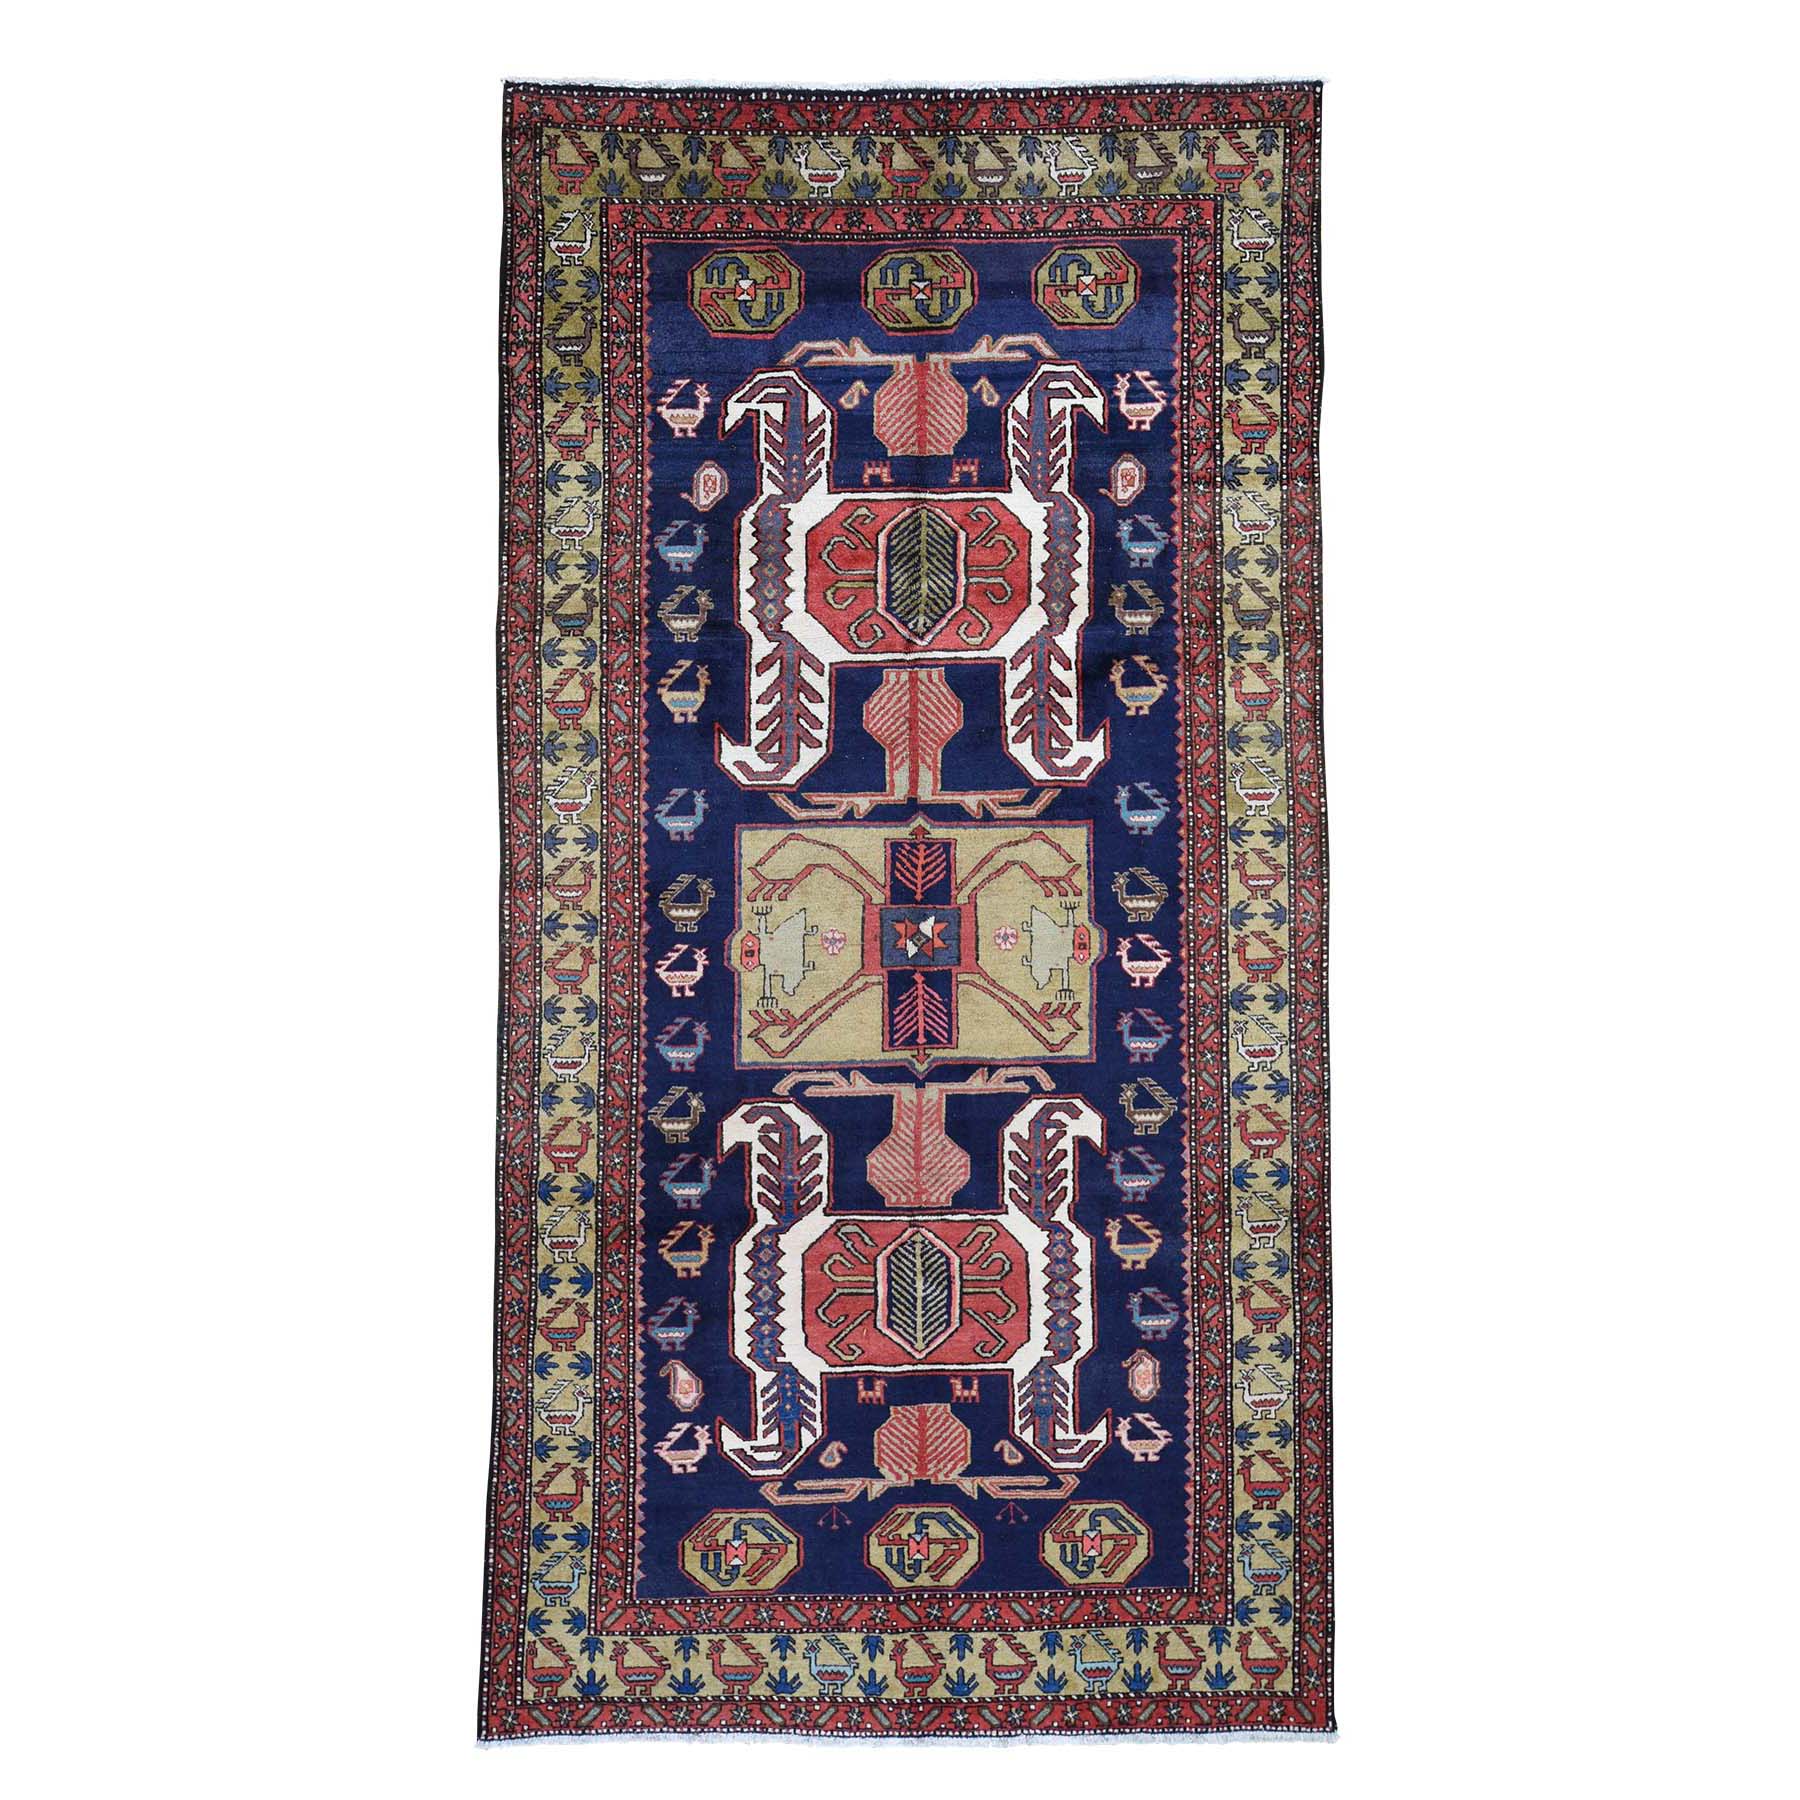 5'7"x11' Vintage North West Persian With Ancient Peacocks Figure Motifs  Wide Gallery Runner Hand Woven Oriental Rug 